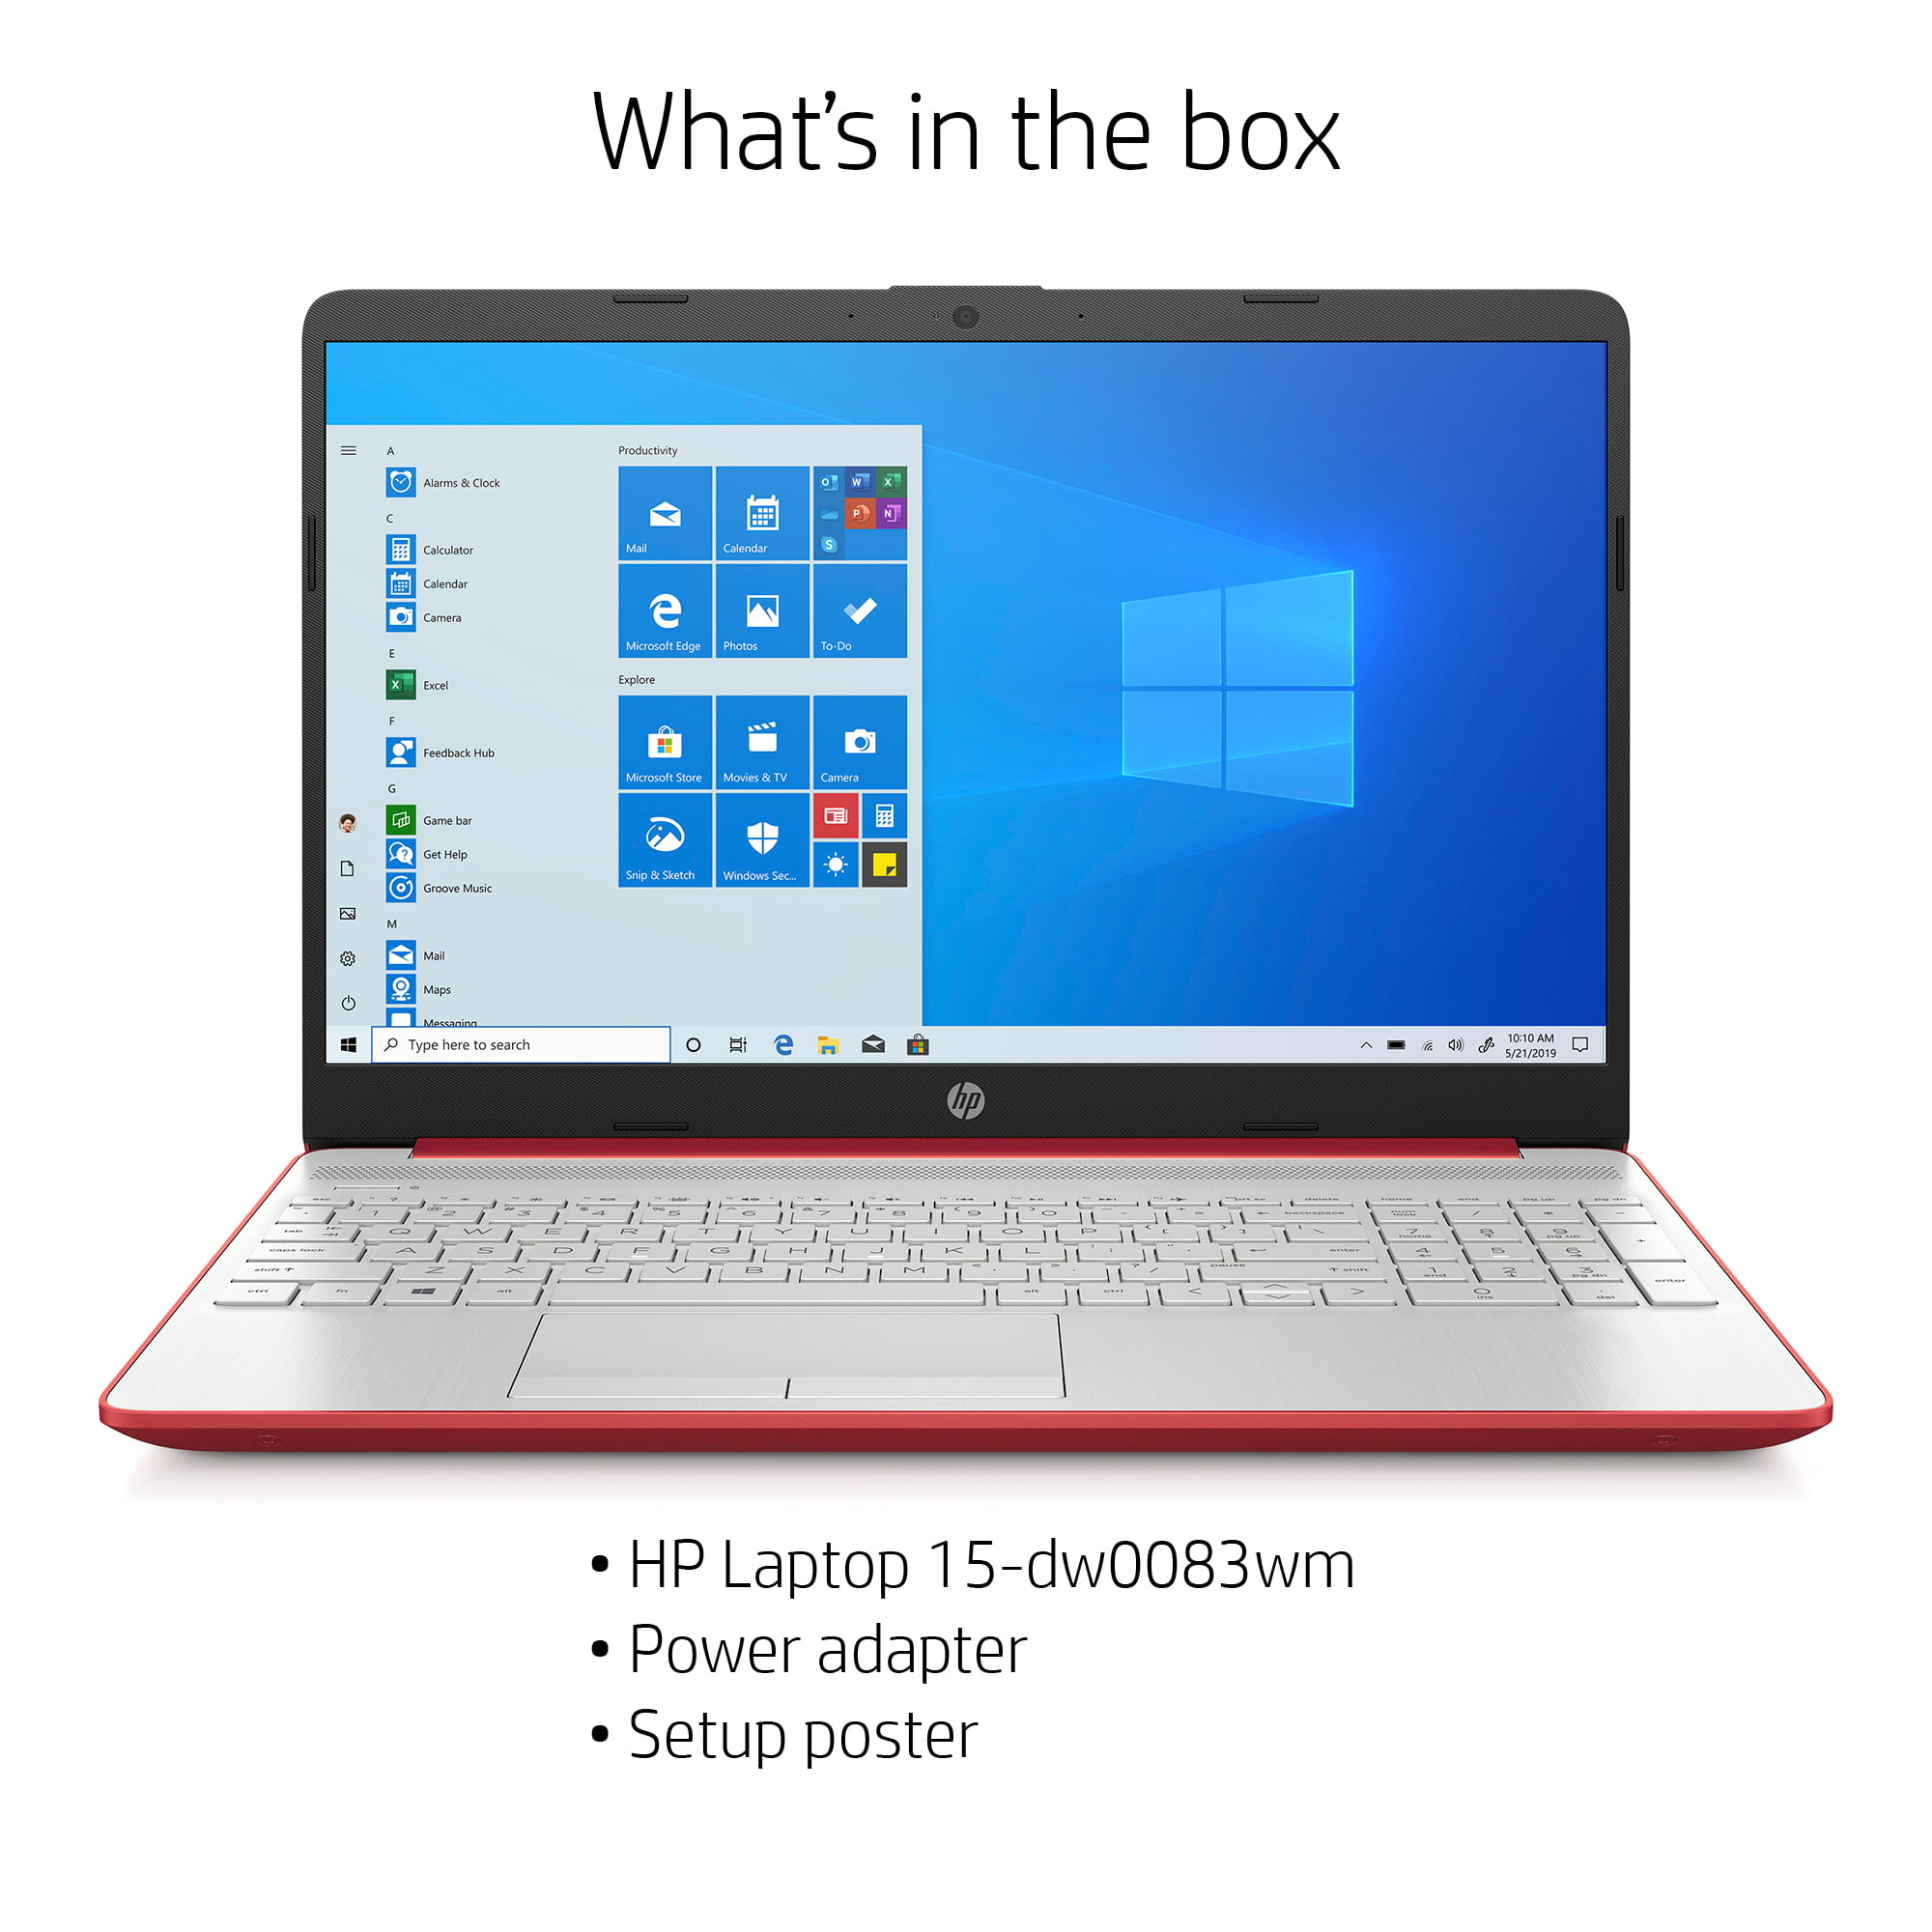 YMMY Instore only HP 15.6" Laptop, Intel Pentium Silver N5000, 4GB RAM, 128GB SSD, Windows 10 Home with Office , Scarlet Red, 15-dw0083wm $124